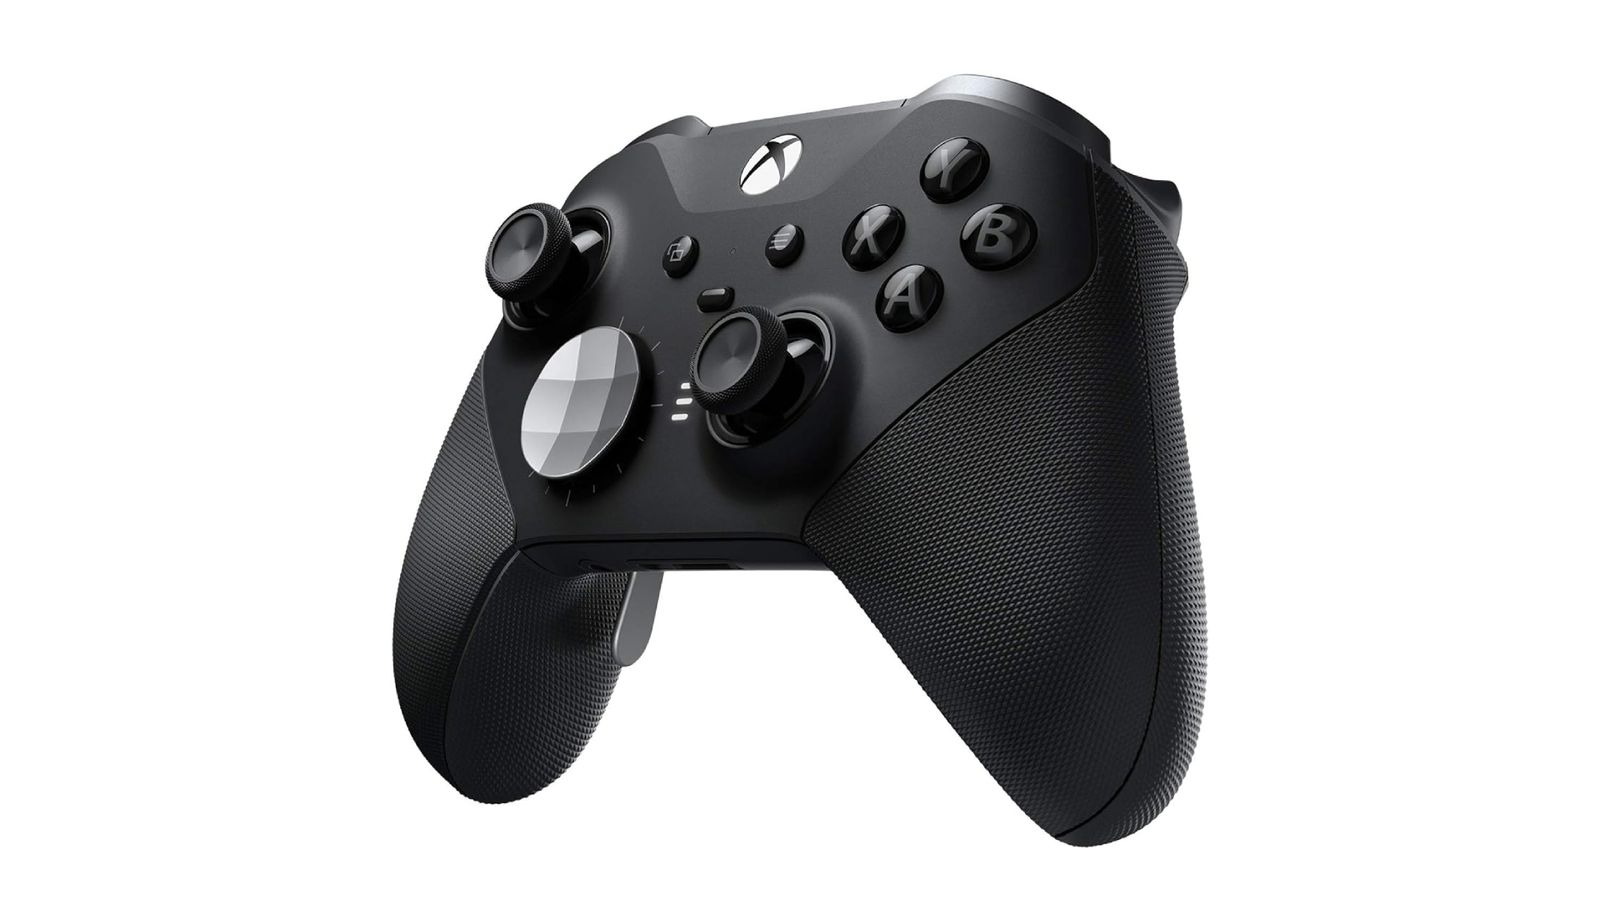 Xbox Elite Series 2 product image of a black Xbox-style gamepad.